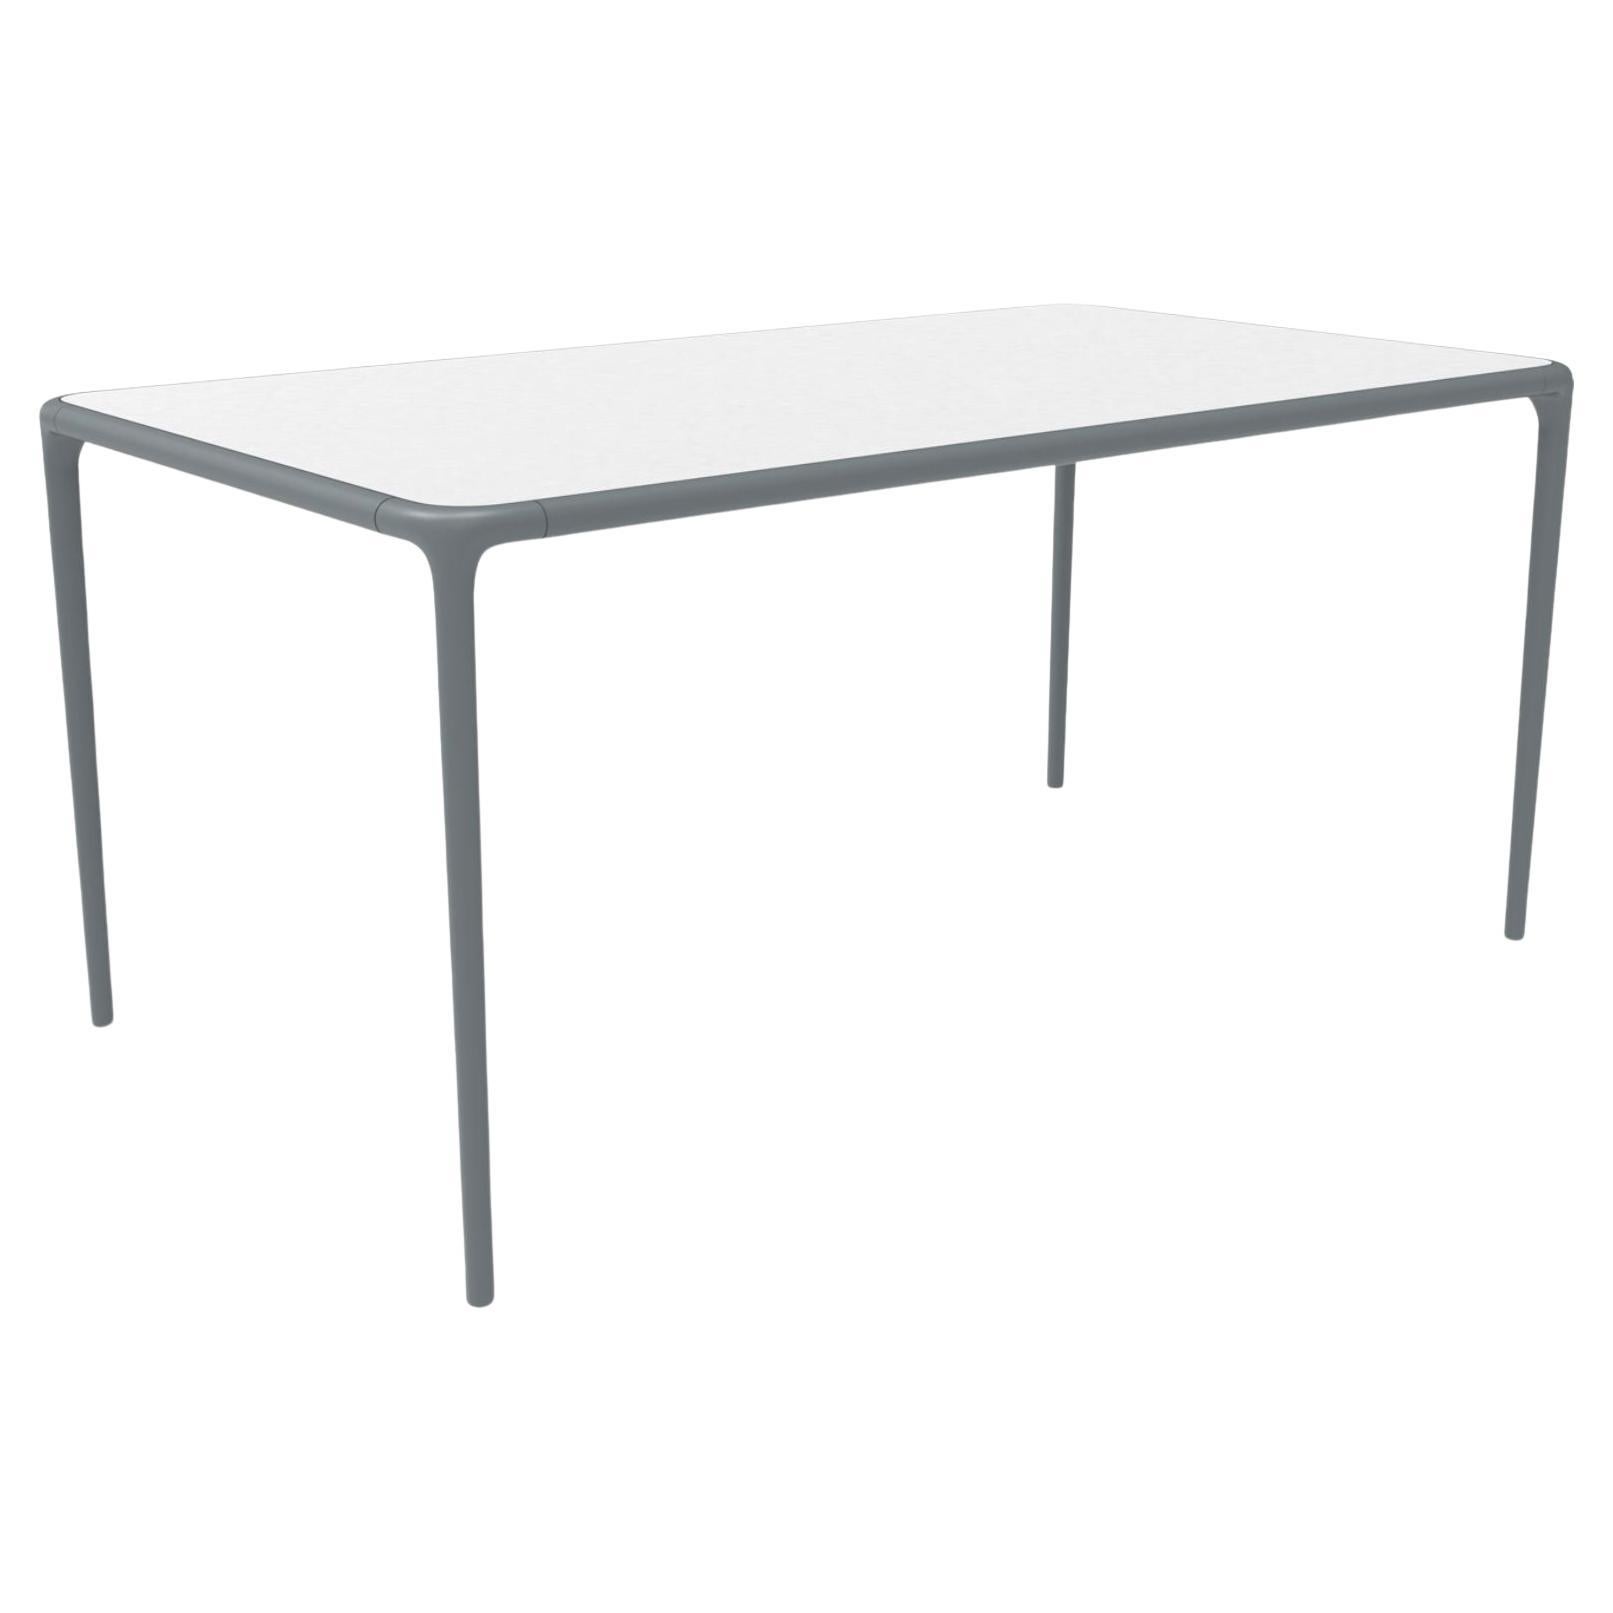 Xaloc Grey Glass Top Table 160 by Mowee For Sale